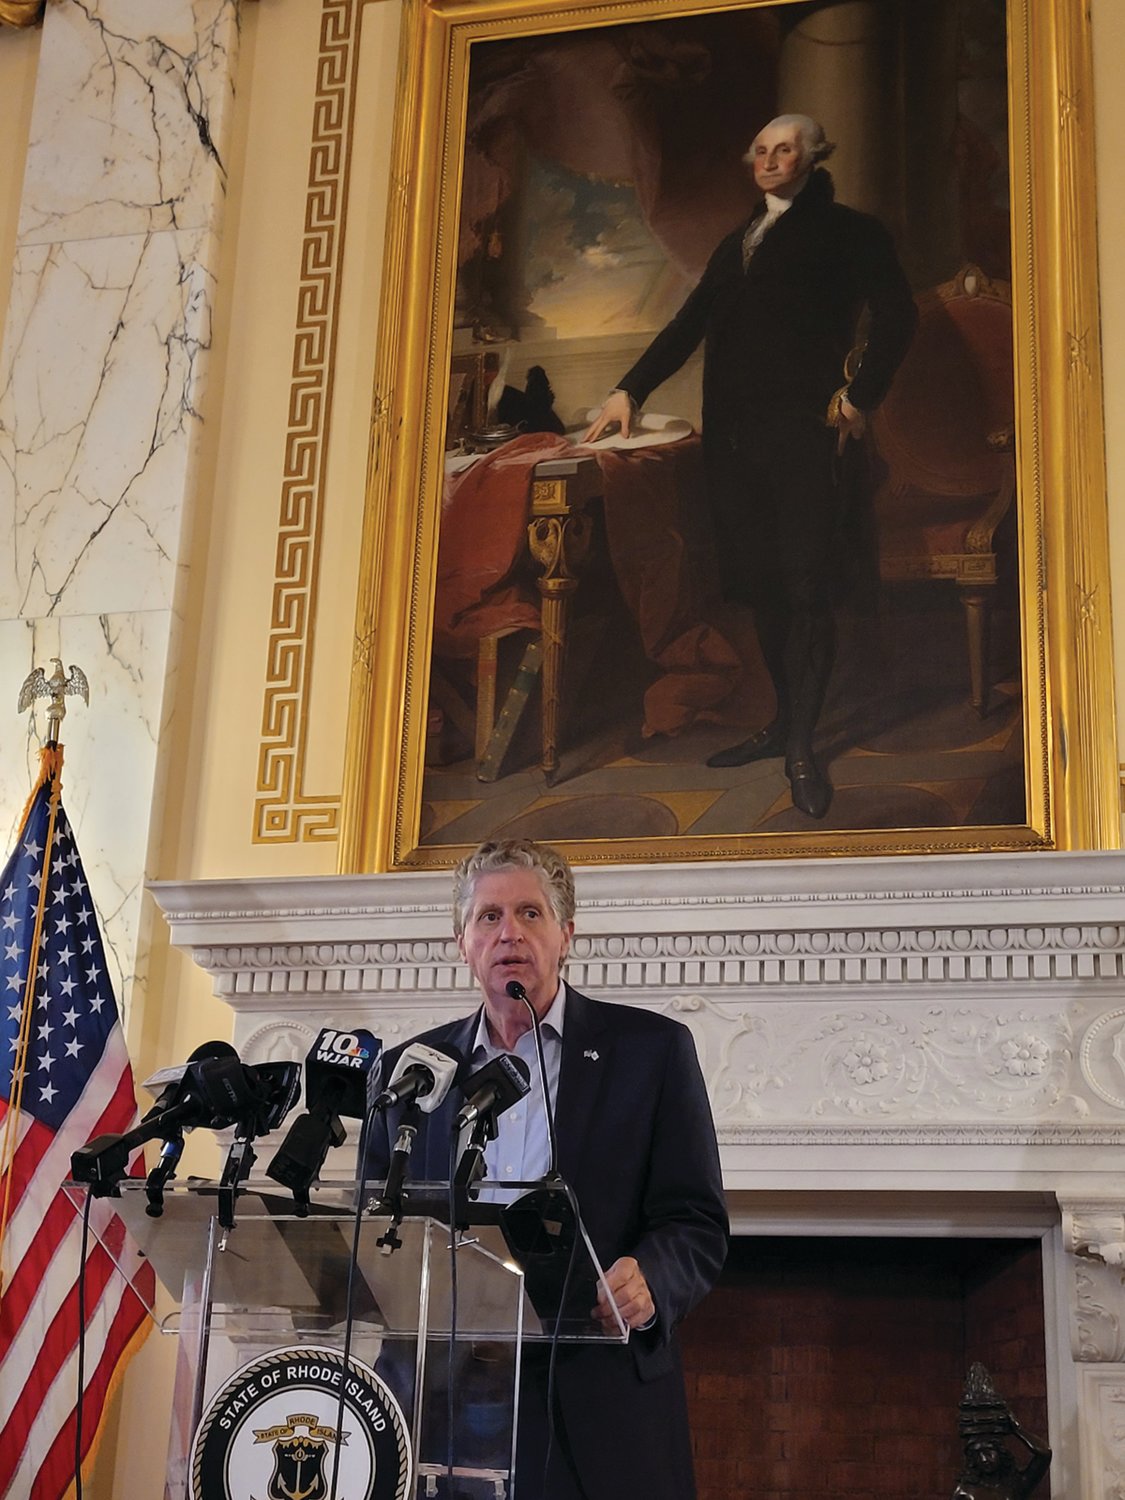 Last Friday morning, Rhode Island Gov. Dan McKee addressed the crowd before he ceremonially signed four bills into law, each aiming to rescue lives from the deadly opioid epidemic.